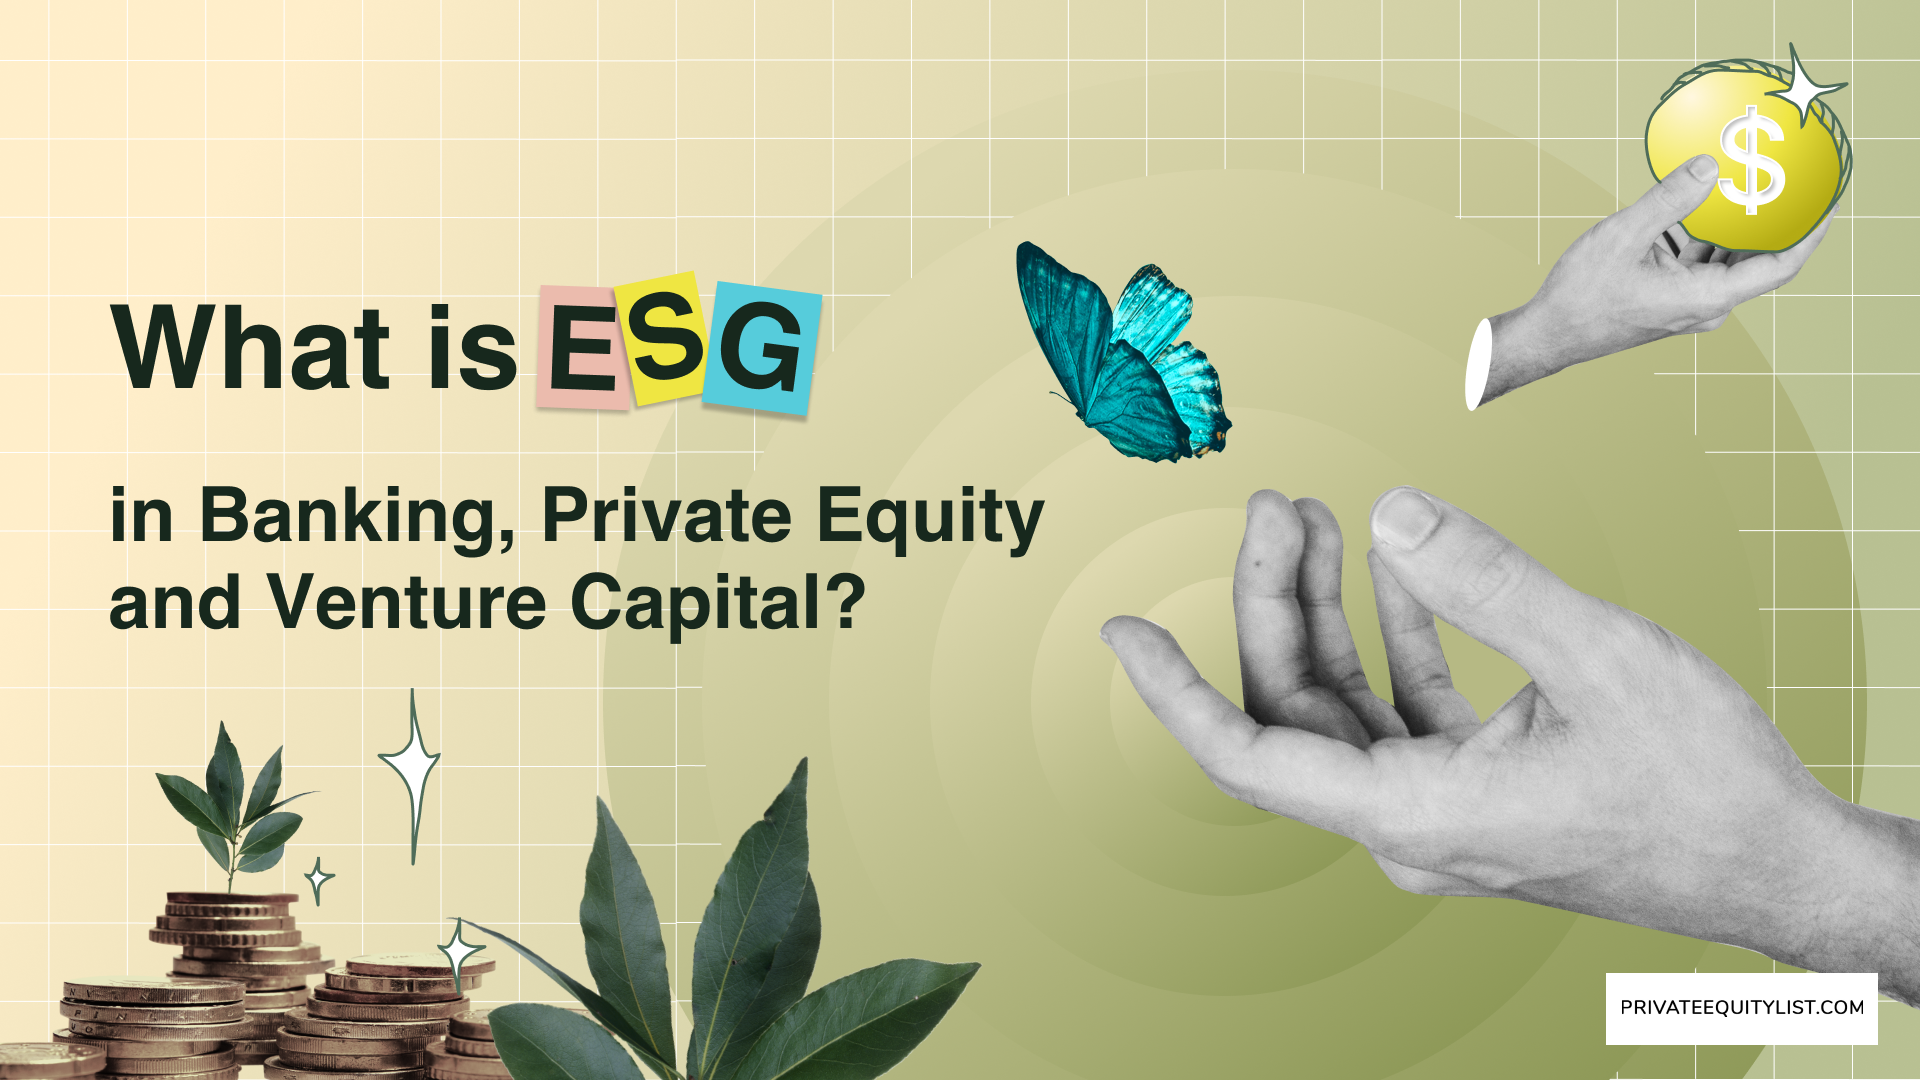 What is ESG in Banking, Private Equity, and Venture Capital?